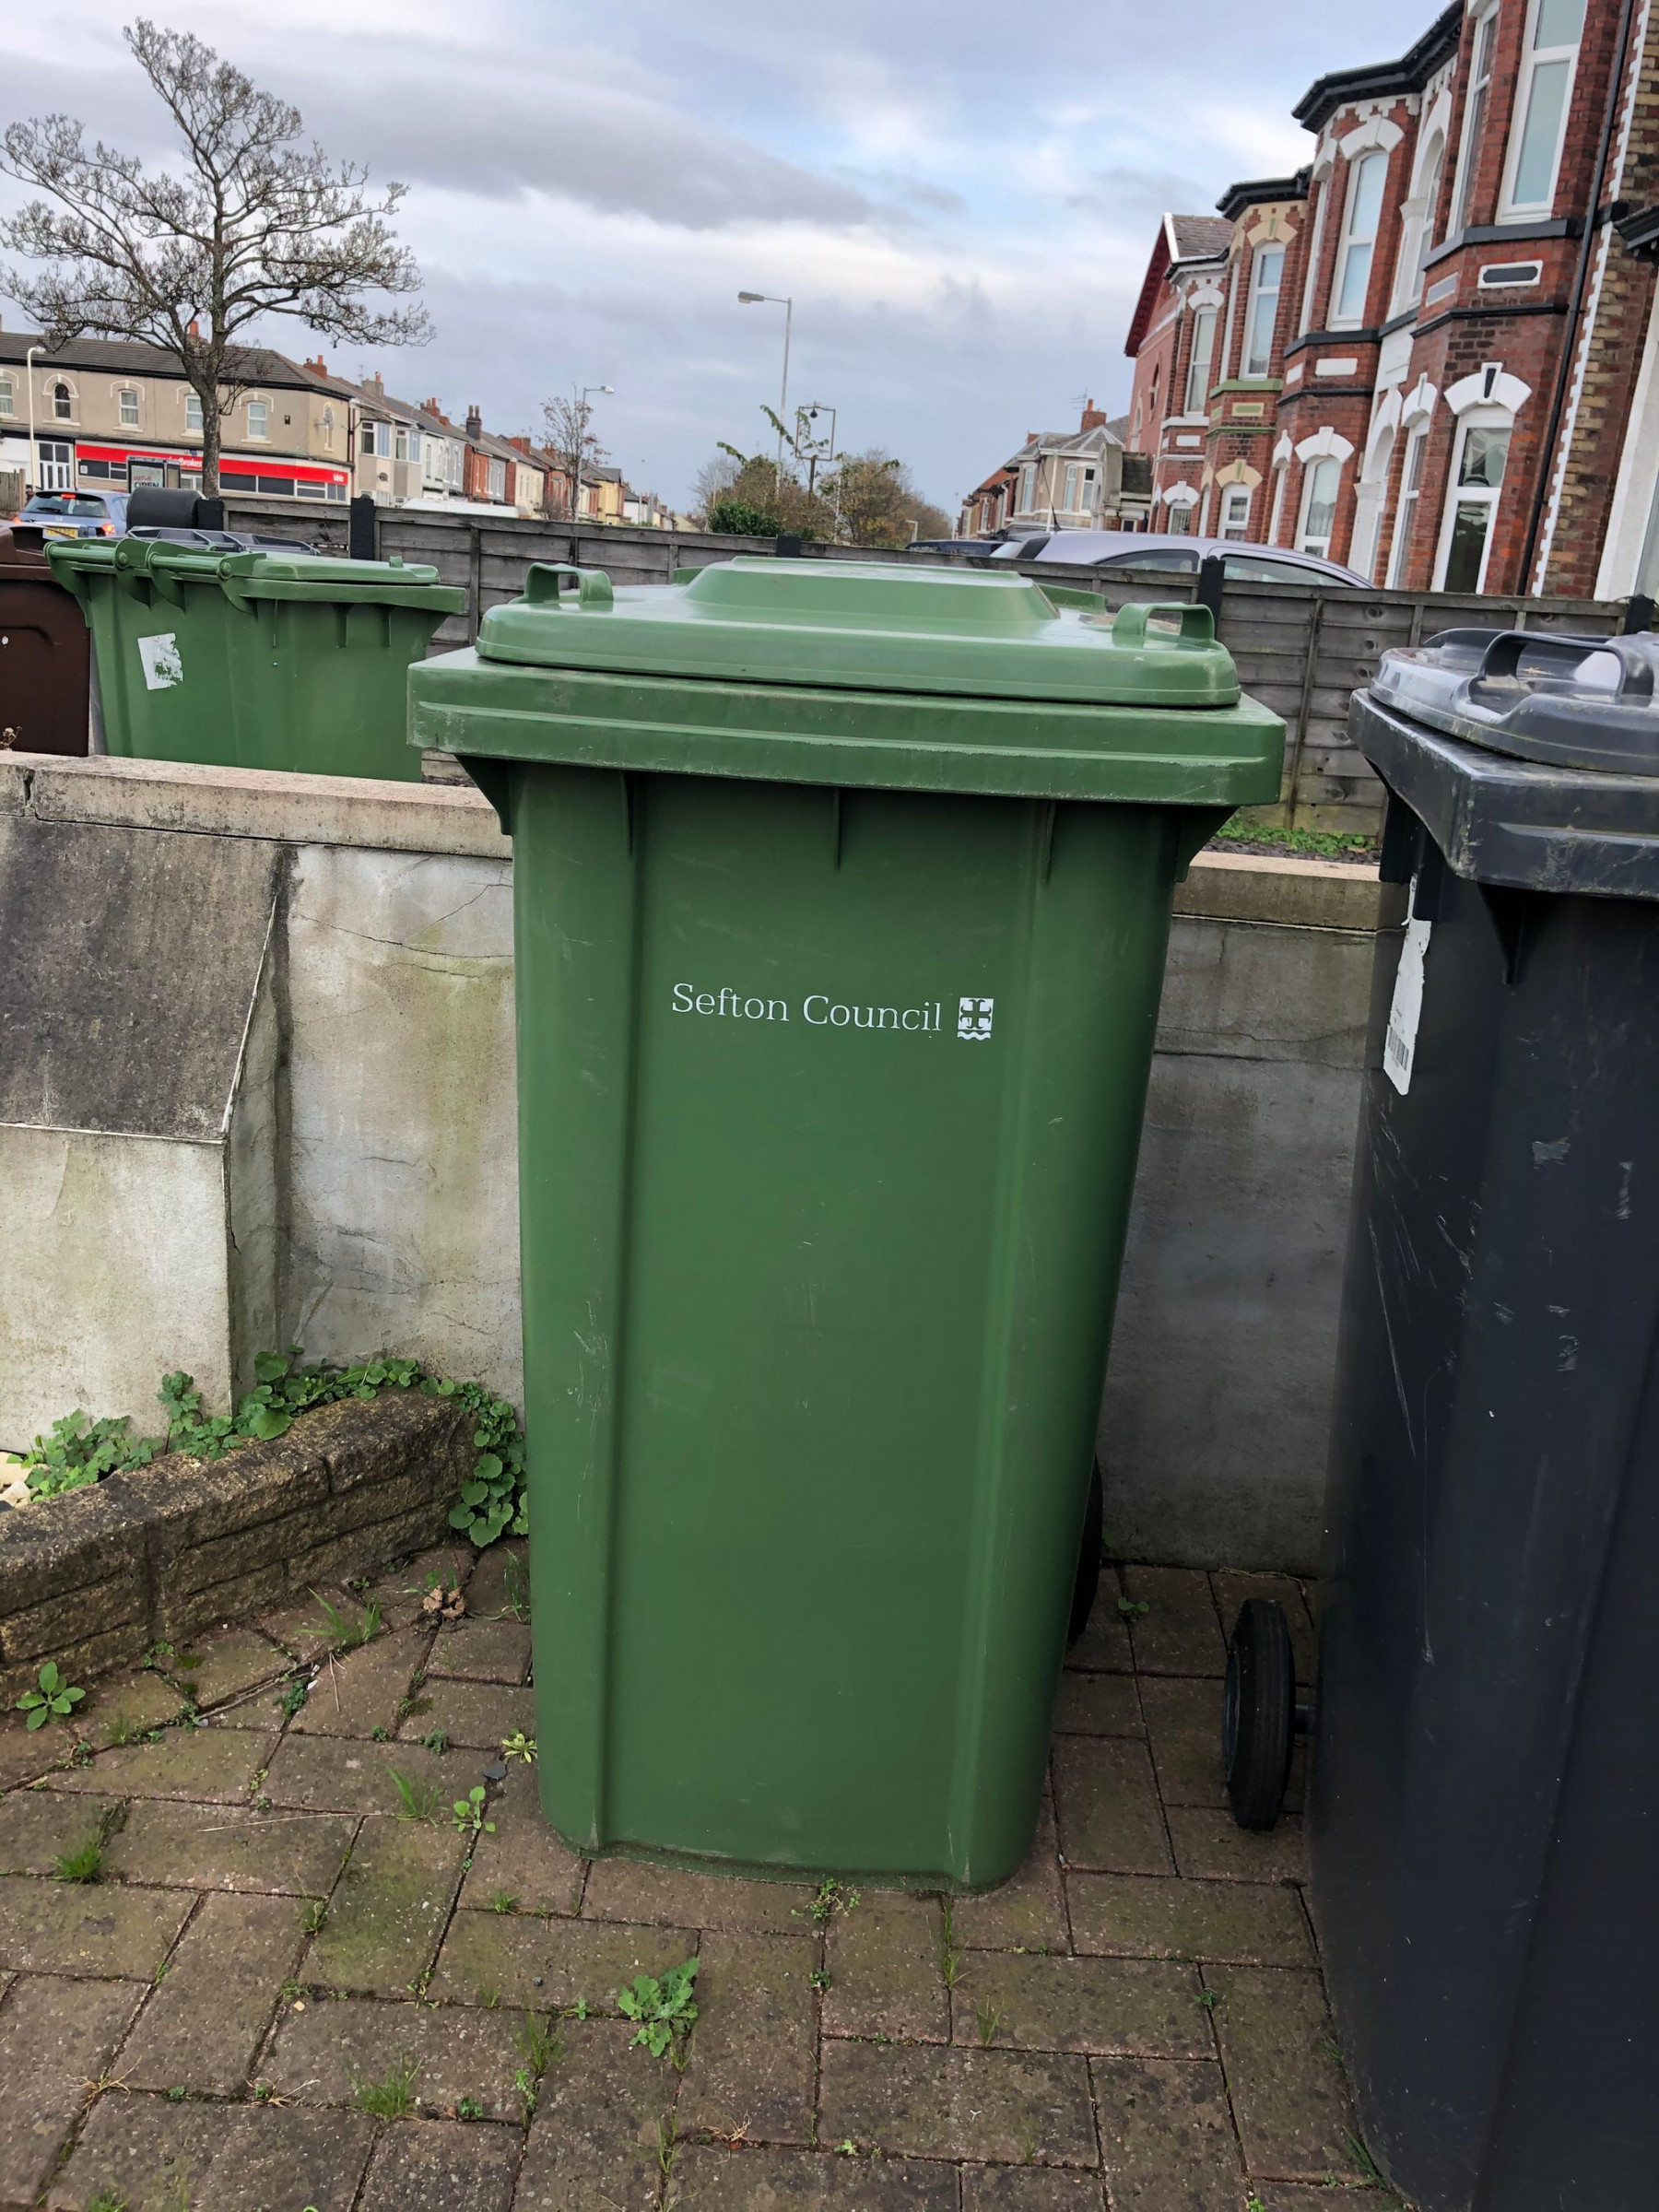 Futile" calls for -month garden waste collections rejected